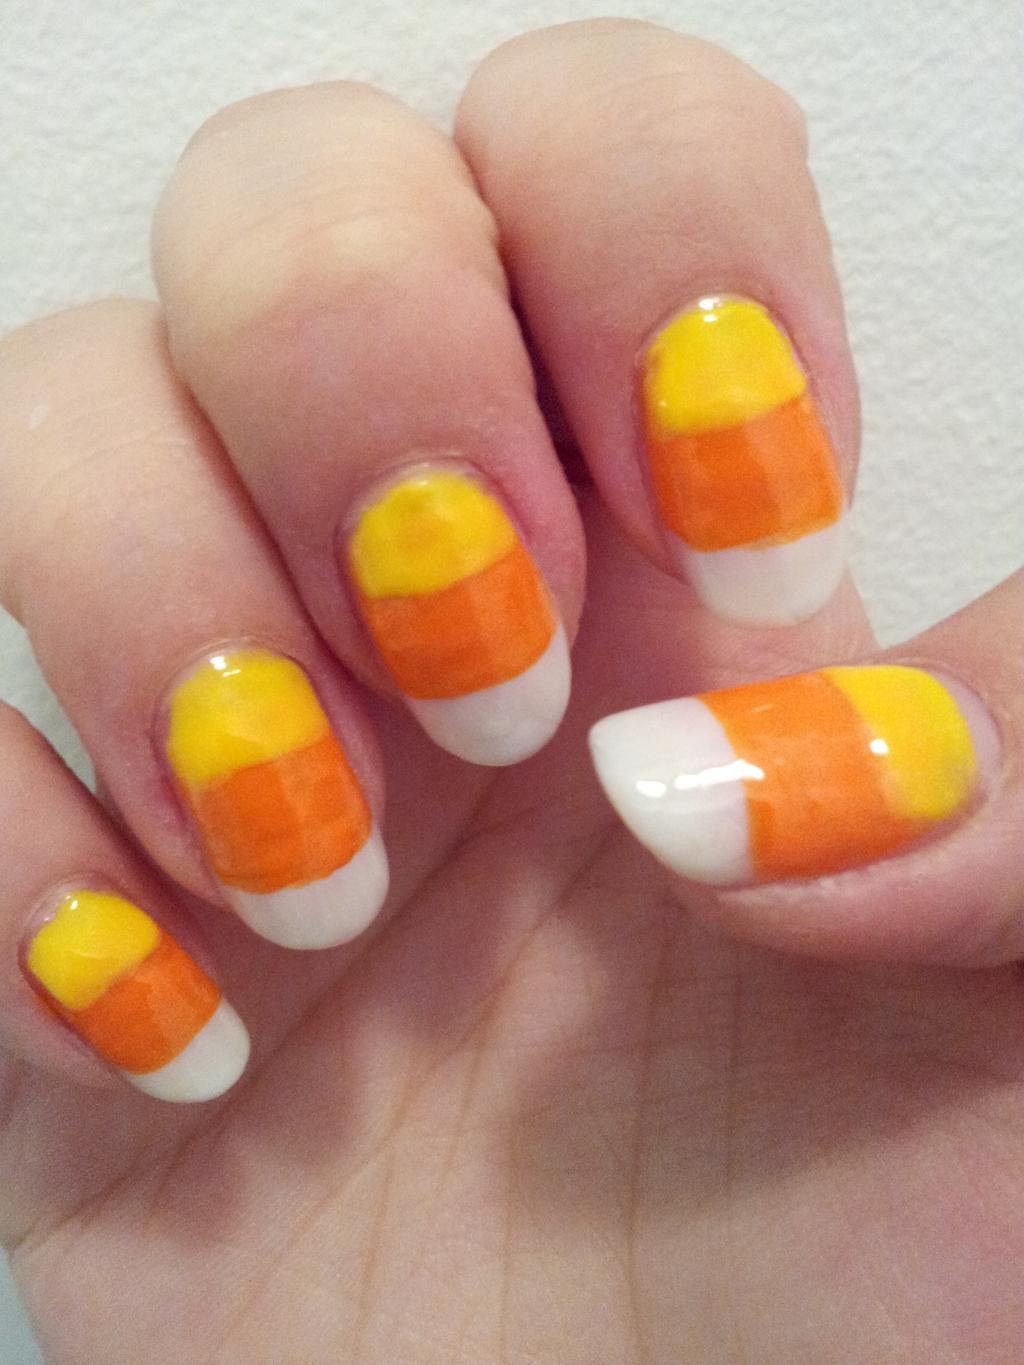 Candy Corn Nail Designs
 Candy Corn Nail Art by aniapaluch on deviantART